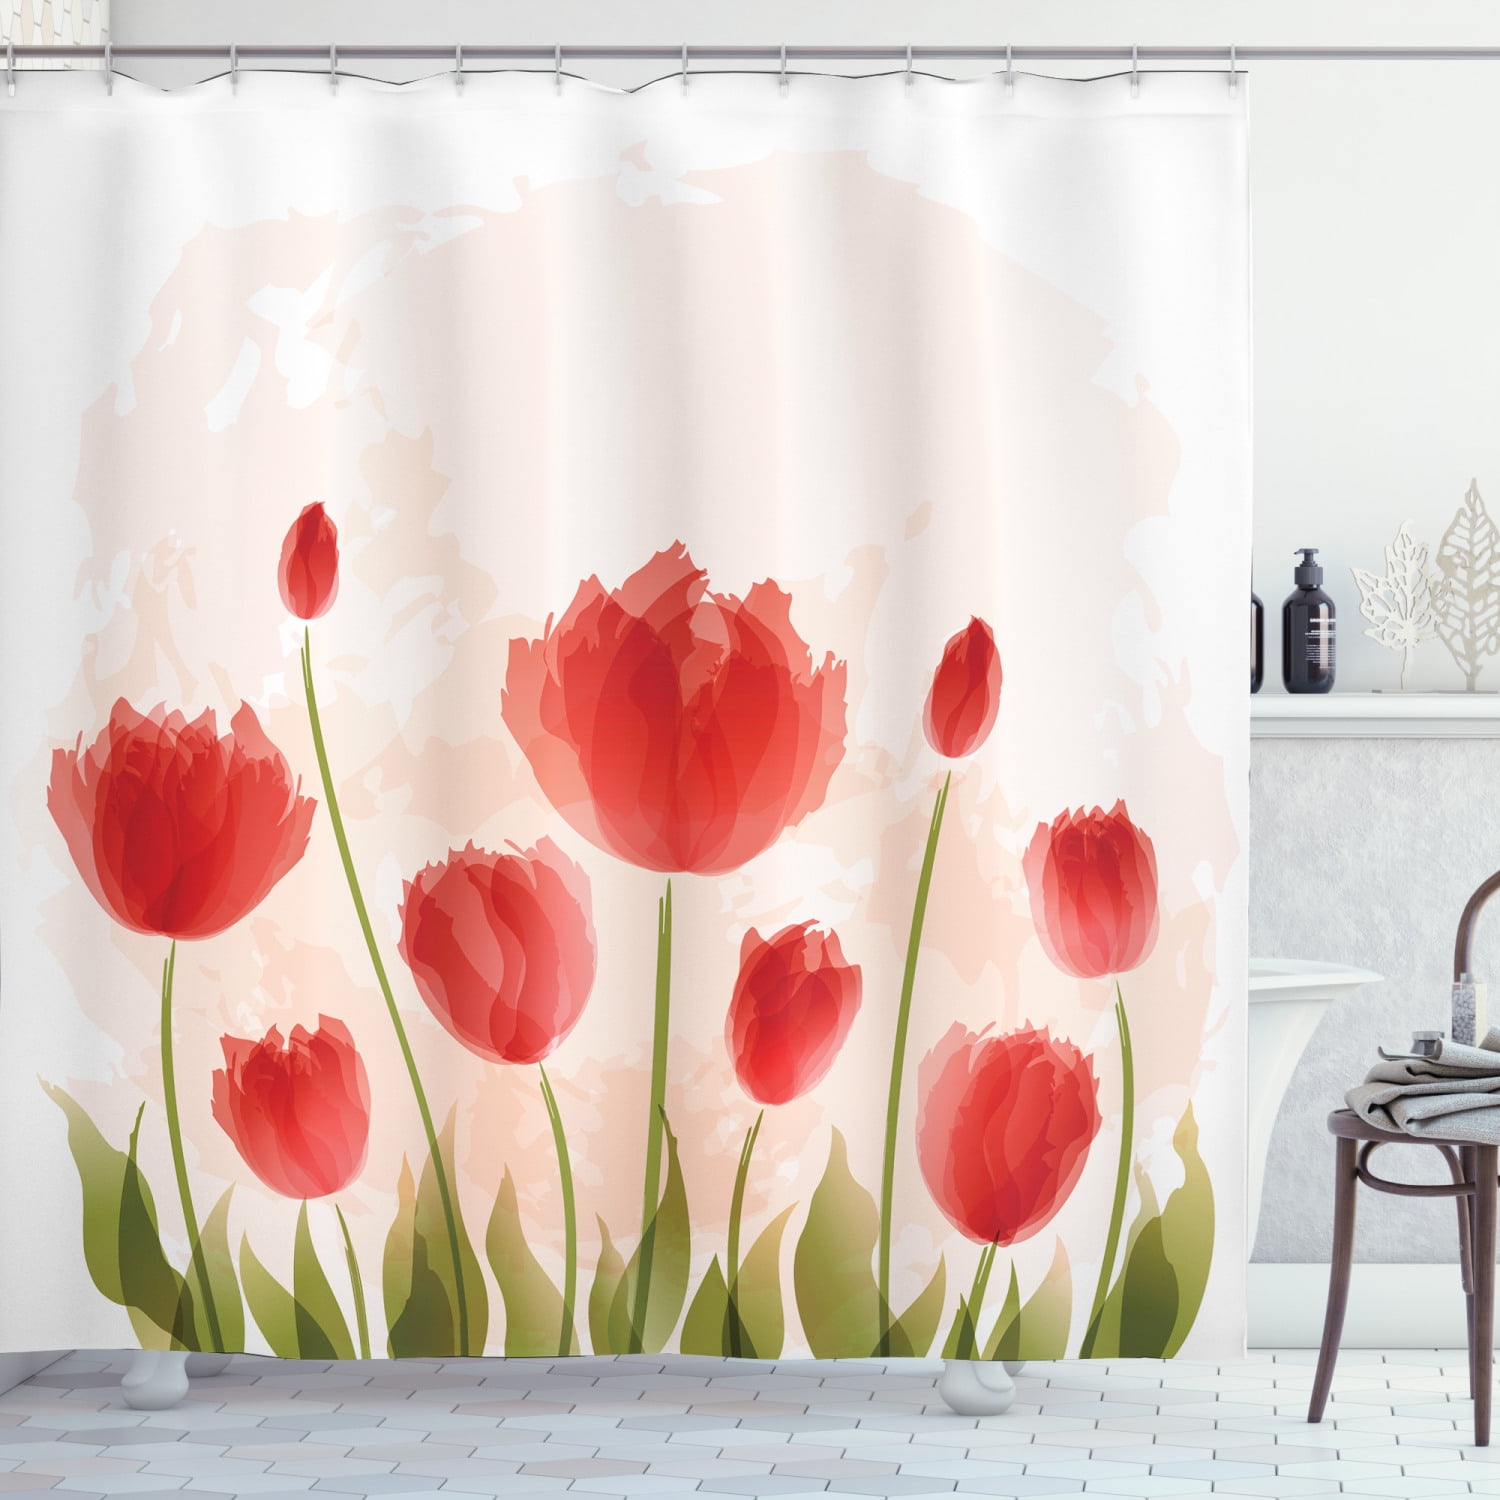 Blooming Flowers Butterfly Water 3D Printing Curtain Mural Blockout Draps Fabric 